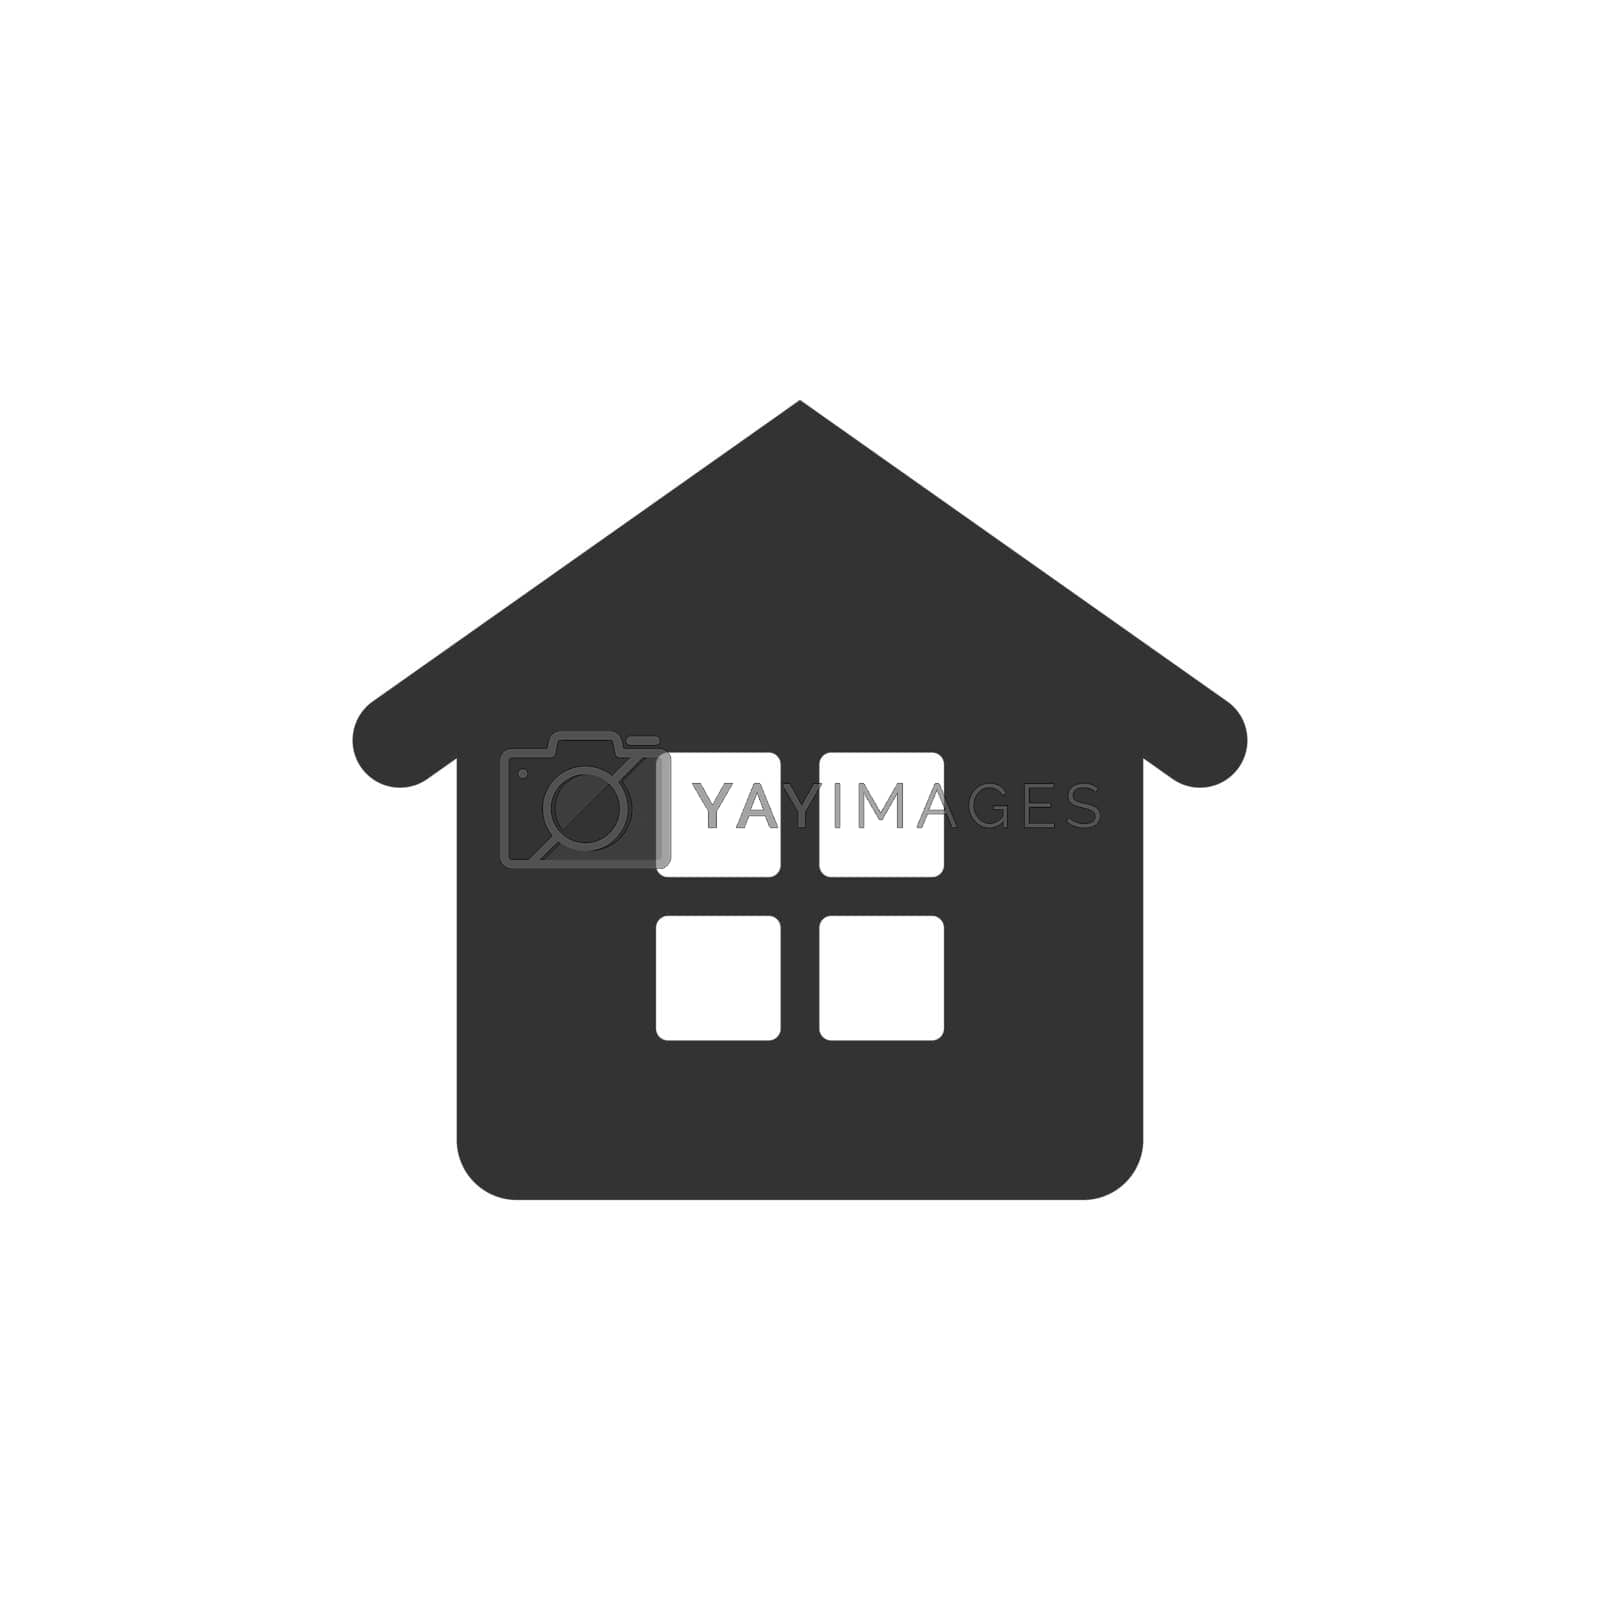 Royalty free image of House building icon in flat style. Home apartment vector illustration on white isolated background. House dwelling business concept. by LysenkoA